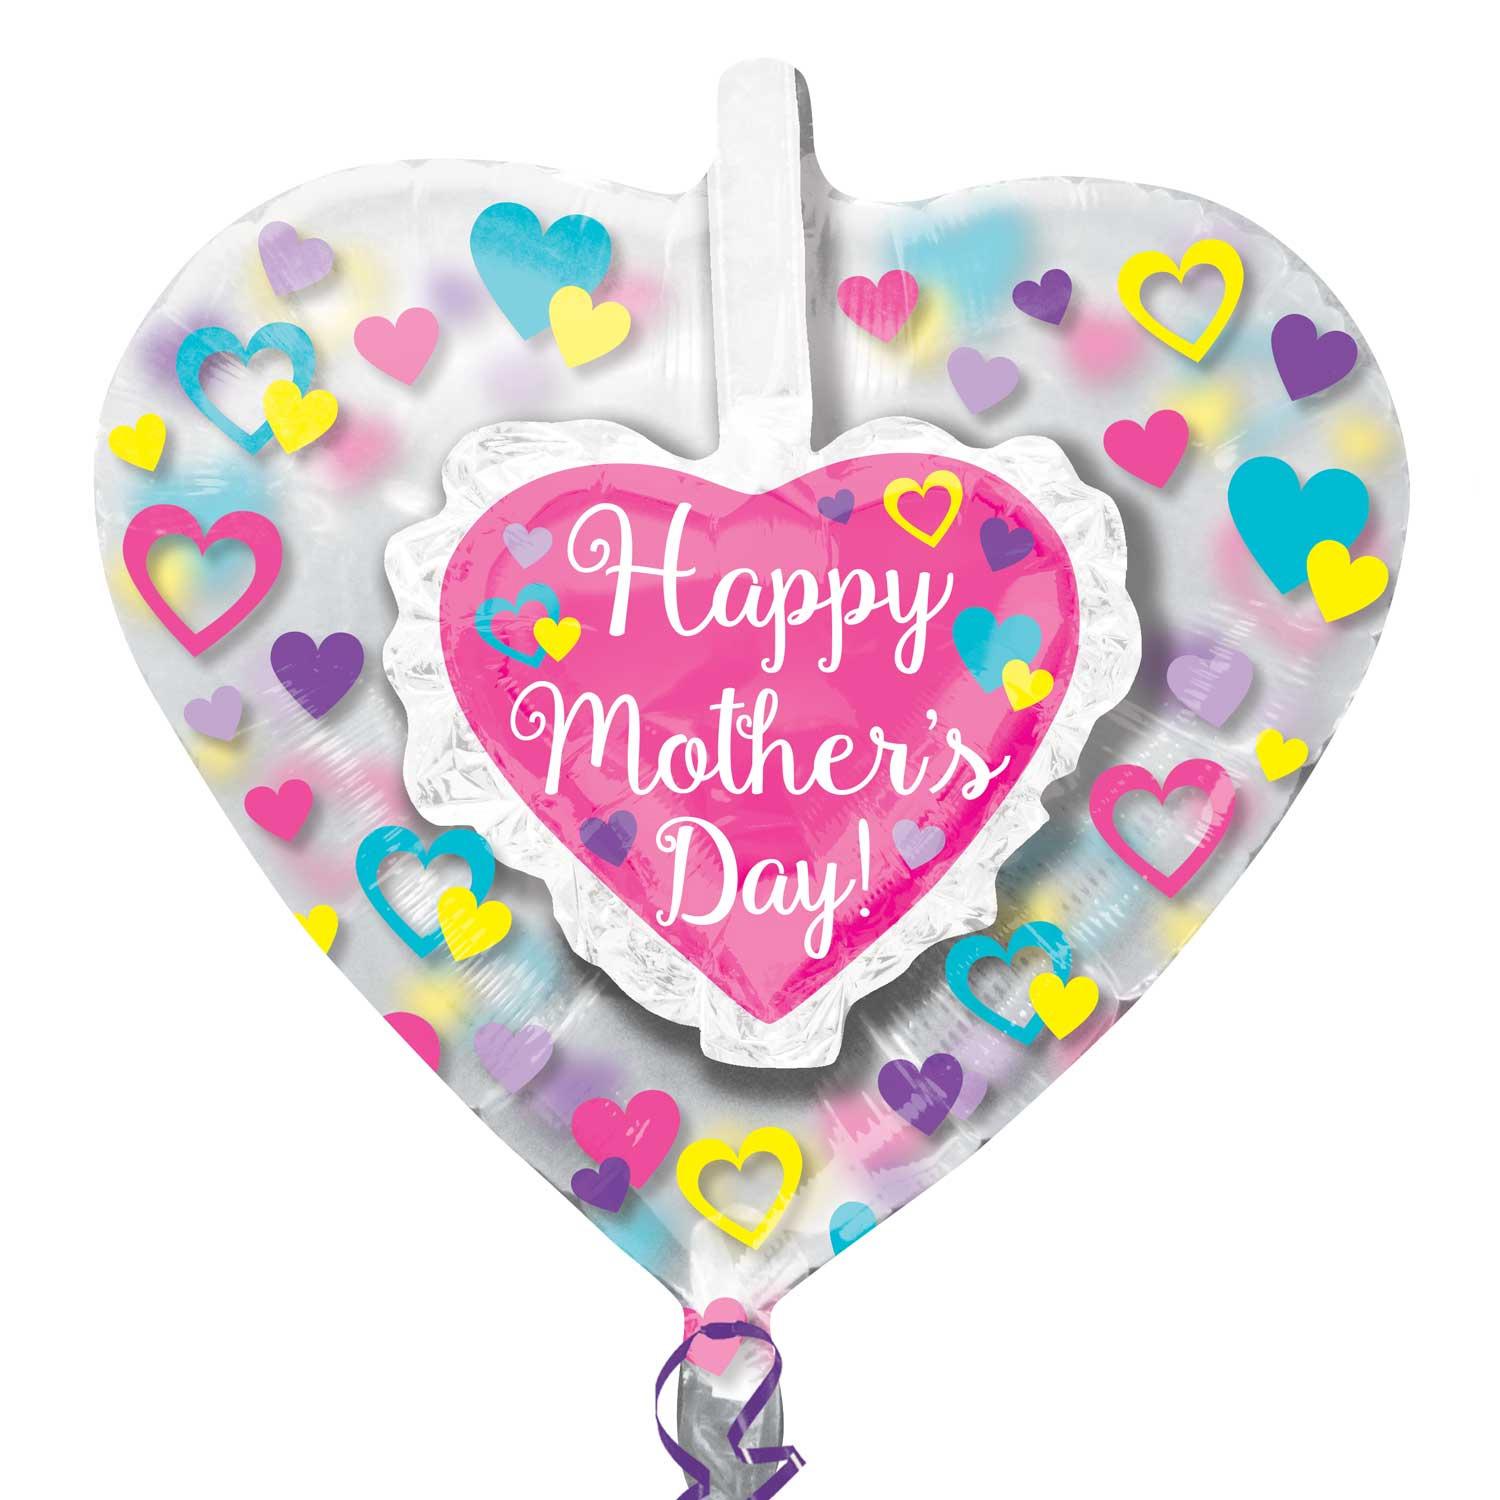 Happy Mother's Day Ruffle Heart Insiders Balloon 66cm Balloons & Streamers - Party Centre